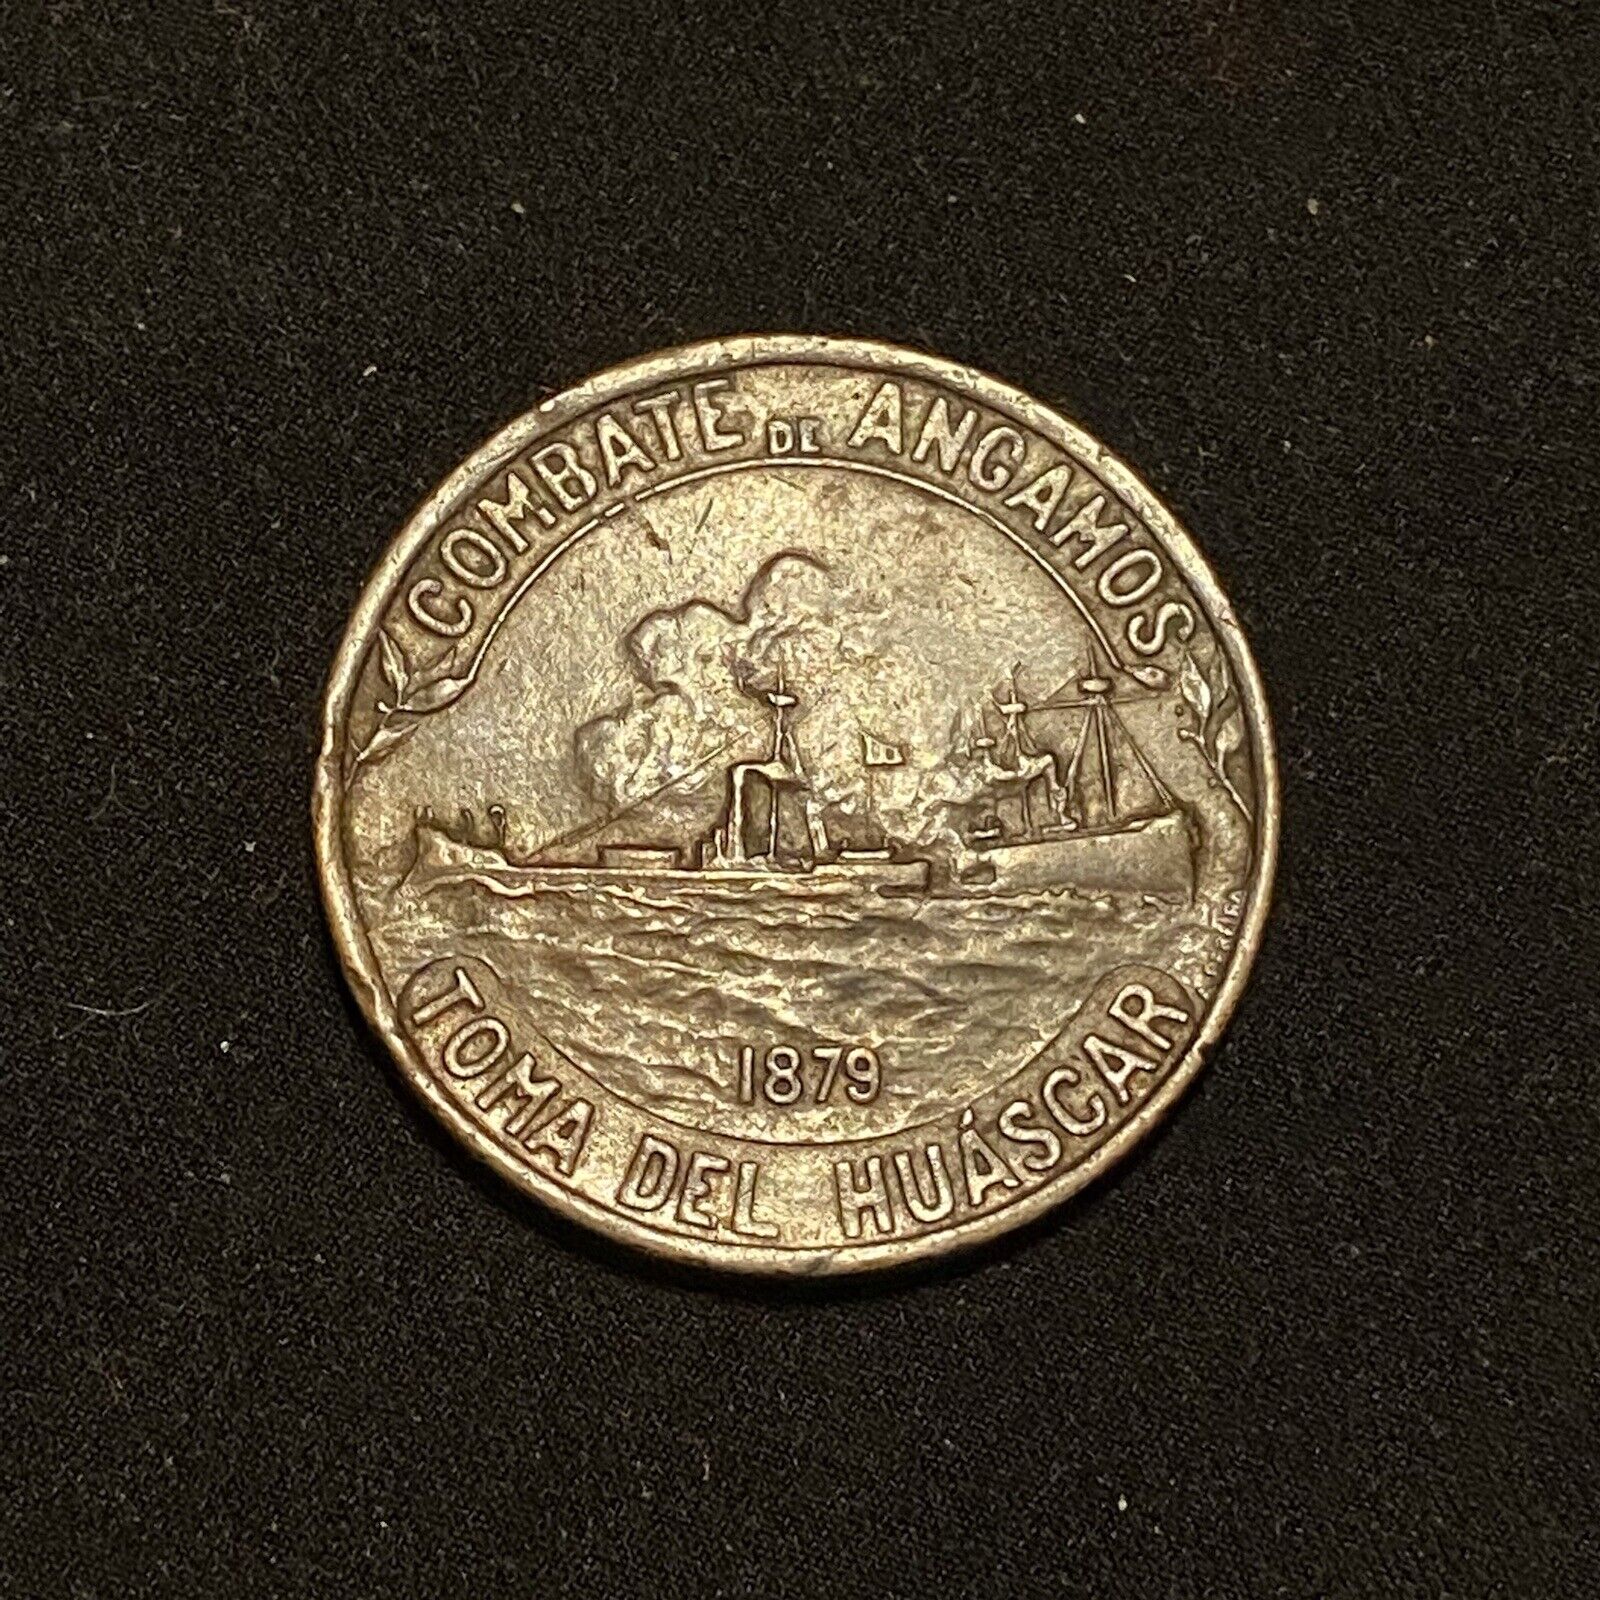 Original 1924 Chilean Medal Navy Battle of Angamos 1879 War of the Pacific